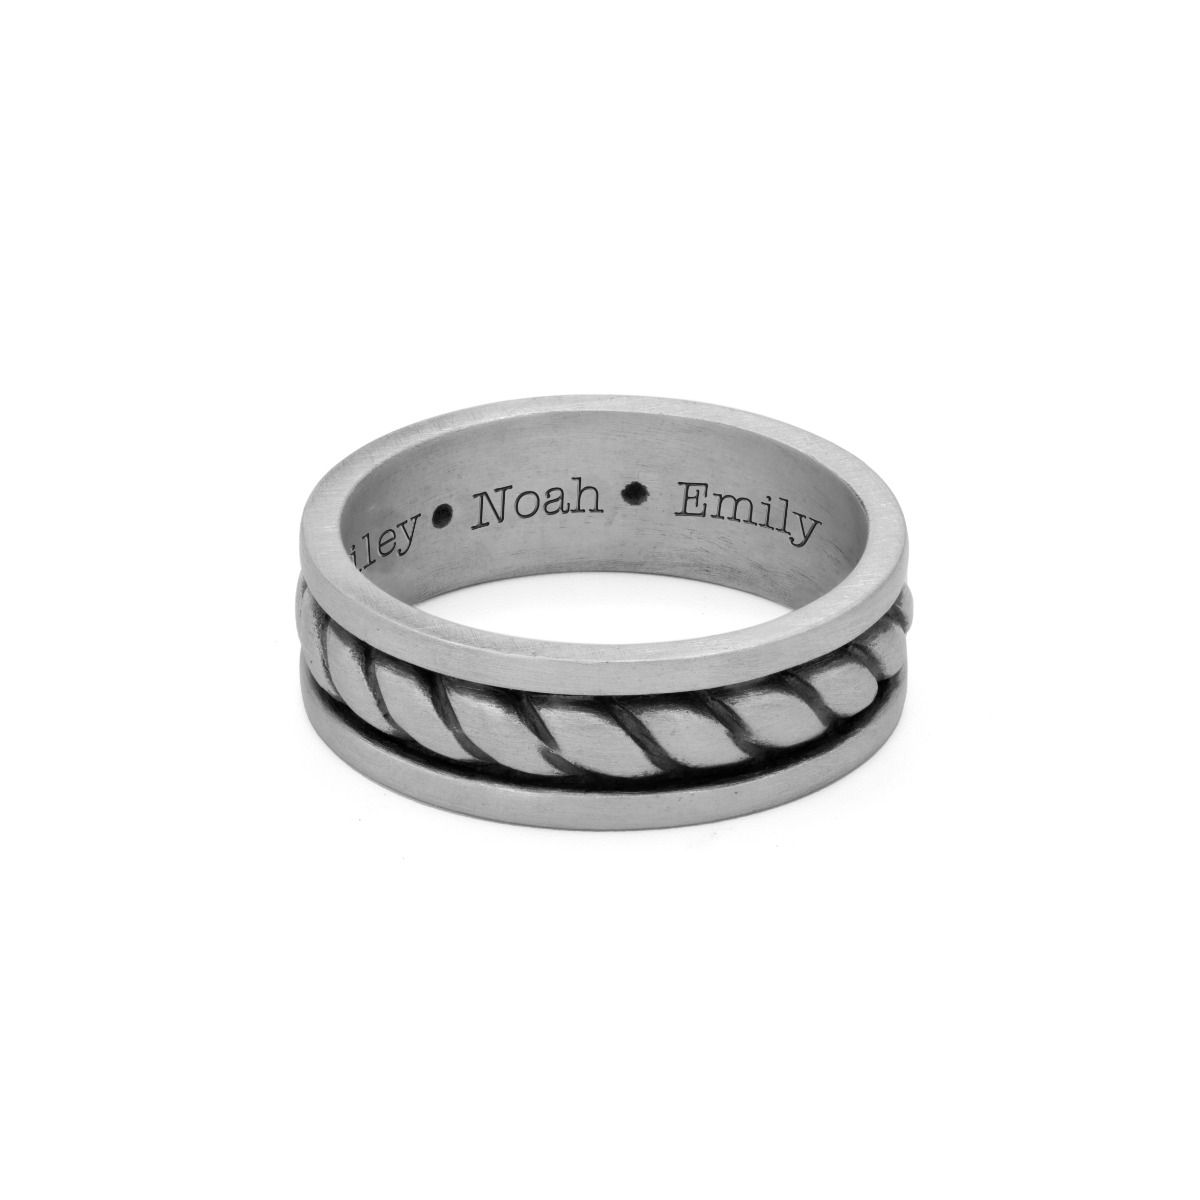 Faceted Oxidized Sterling Silver Ring for Men / Black Hammered Band - Nadin  Art Design - Personalized Jewelry